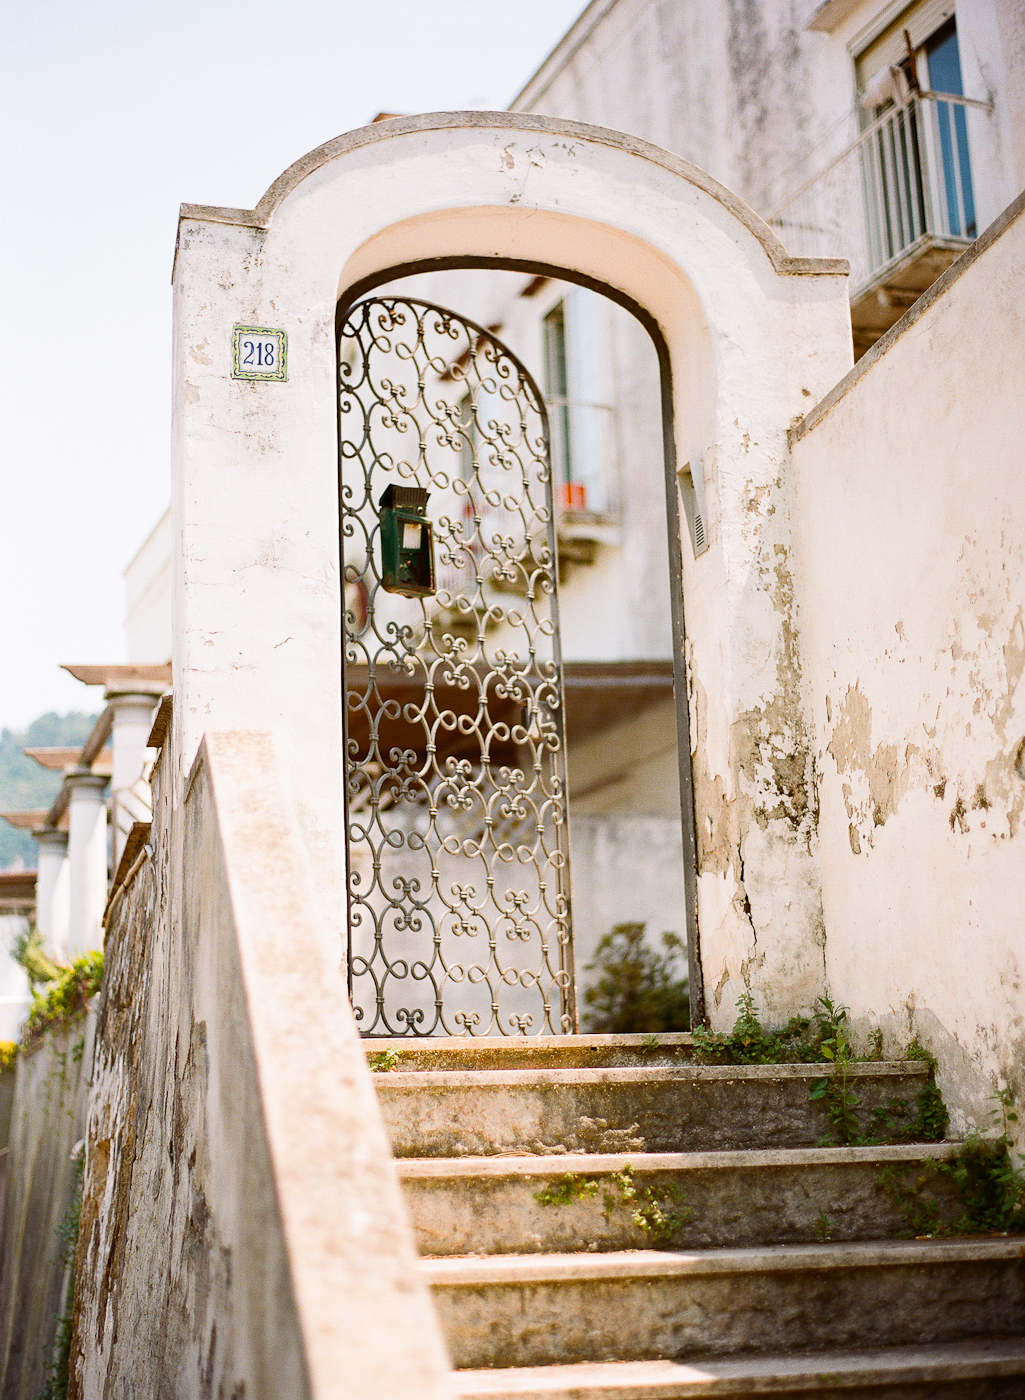 Stone Steps and an Iron Gate in Positano Italy